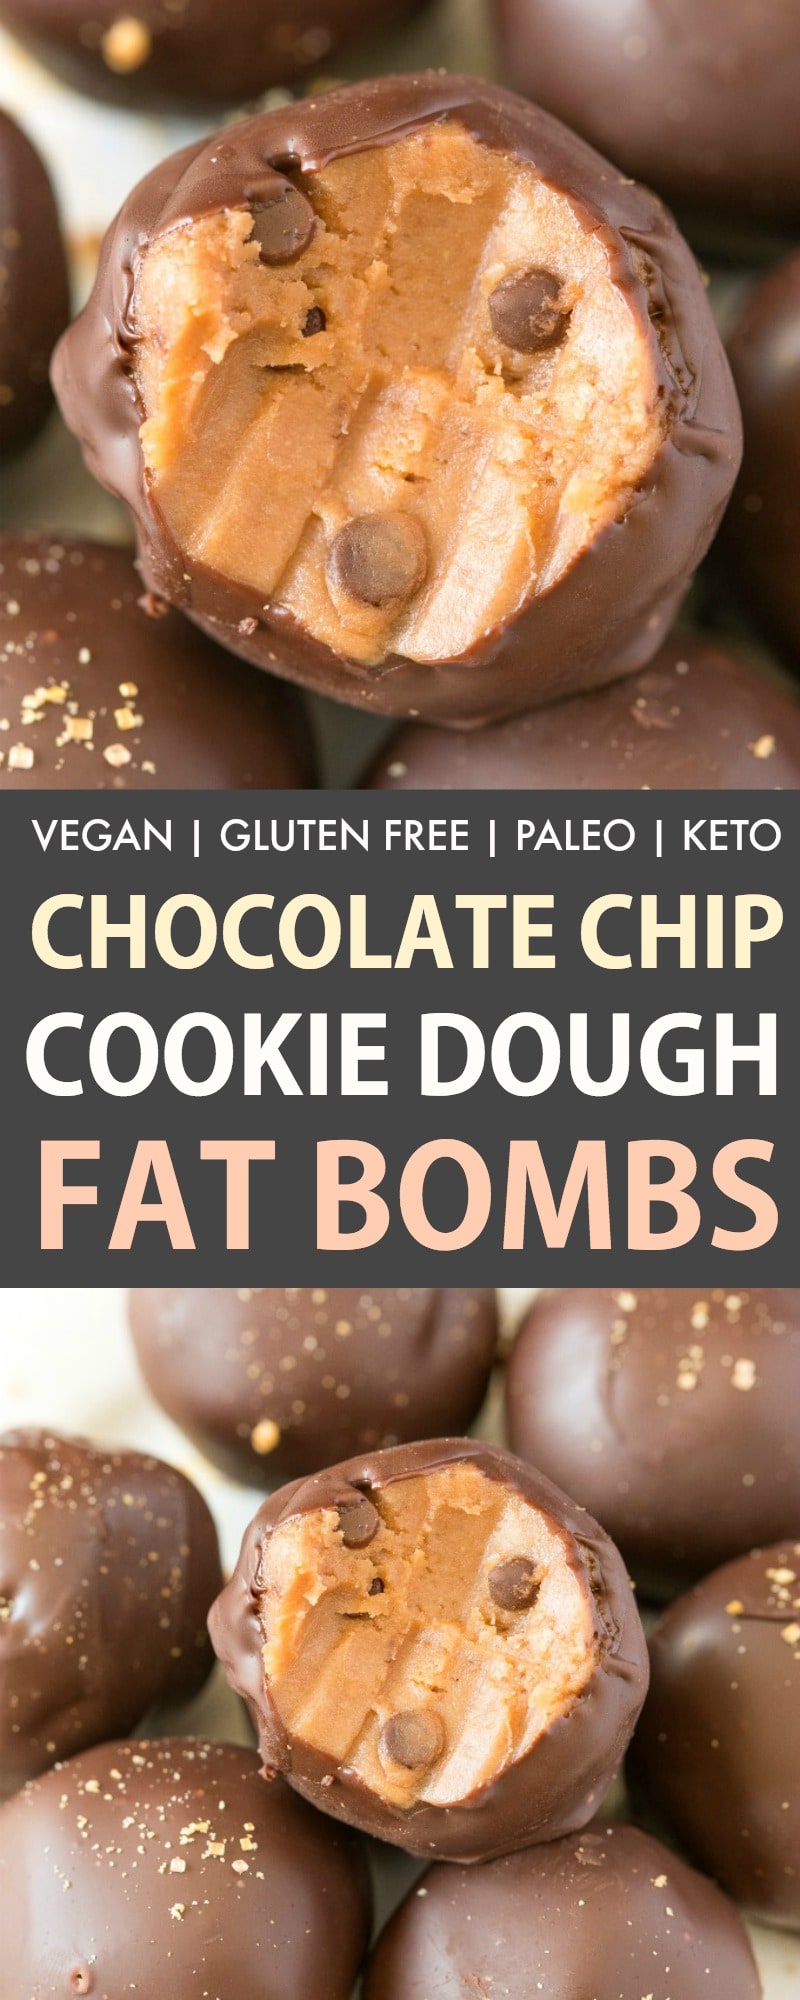 Keto Cookie Dough fat bombs with chocolate chips and perfect for a keto snack or dessert! Made with NO cream cheese, it's also vegan, paleo and gluten-free! 